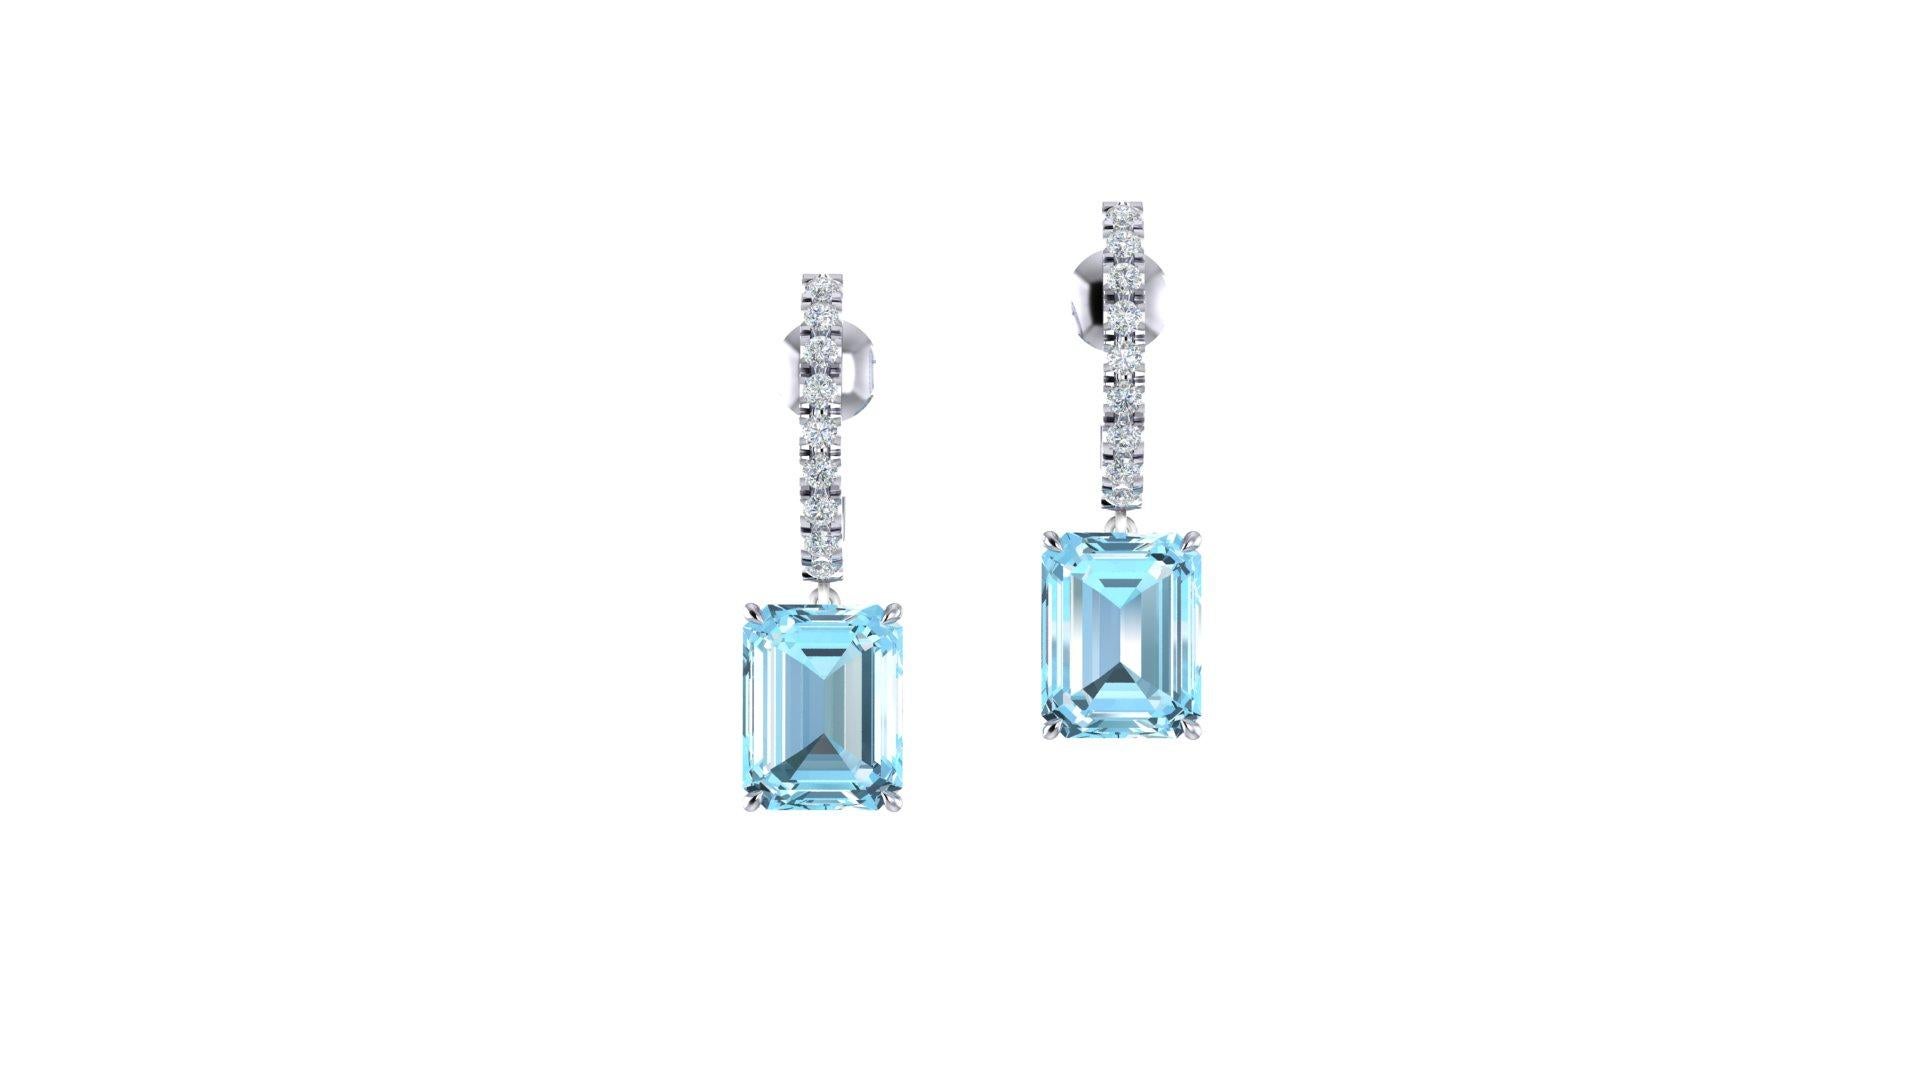 5 Carats Emerald cut Aquamarine and Diamonds Platinum Earrings, diamonds brilliant cut for an approximate total carat weight of 0.28ct of G color, VS clarity, set in Platinum 950 drop dangling earrings
Push back self locking.   Complimentary Screw